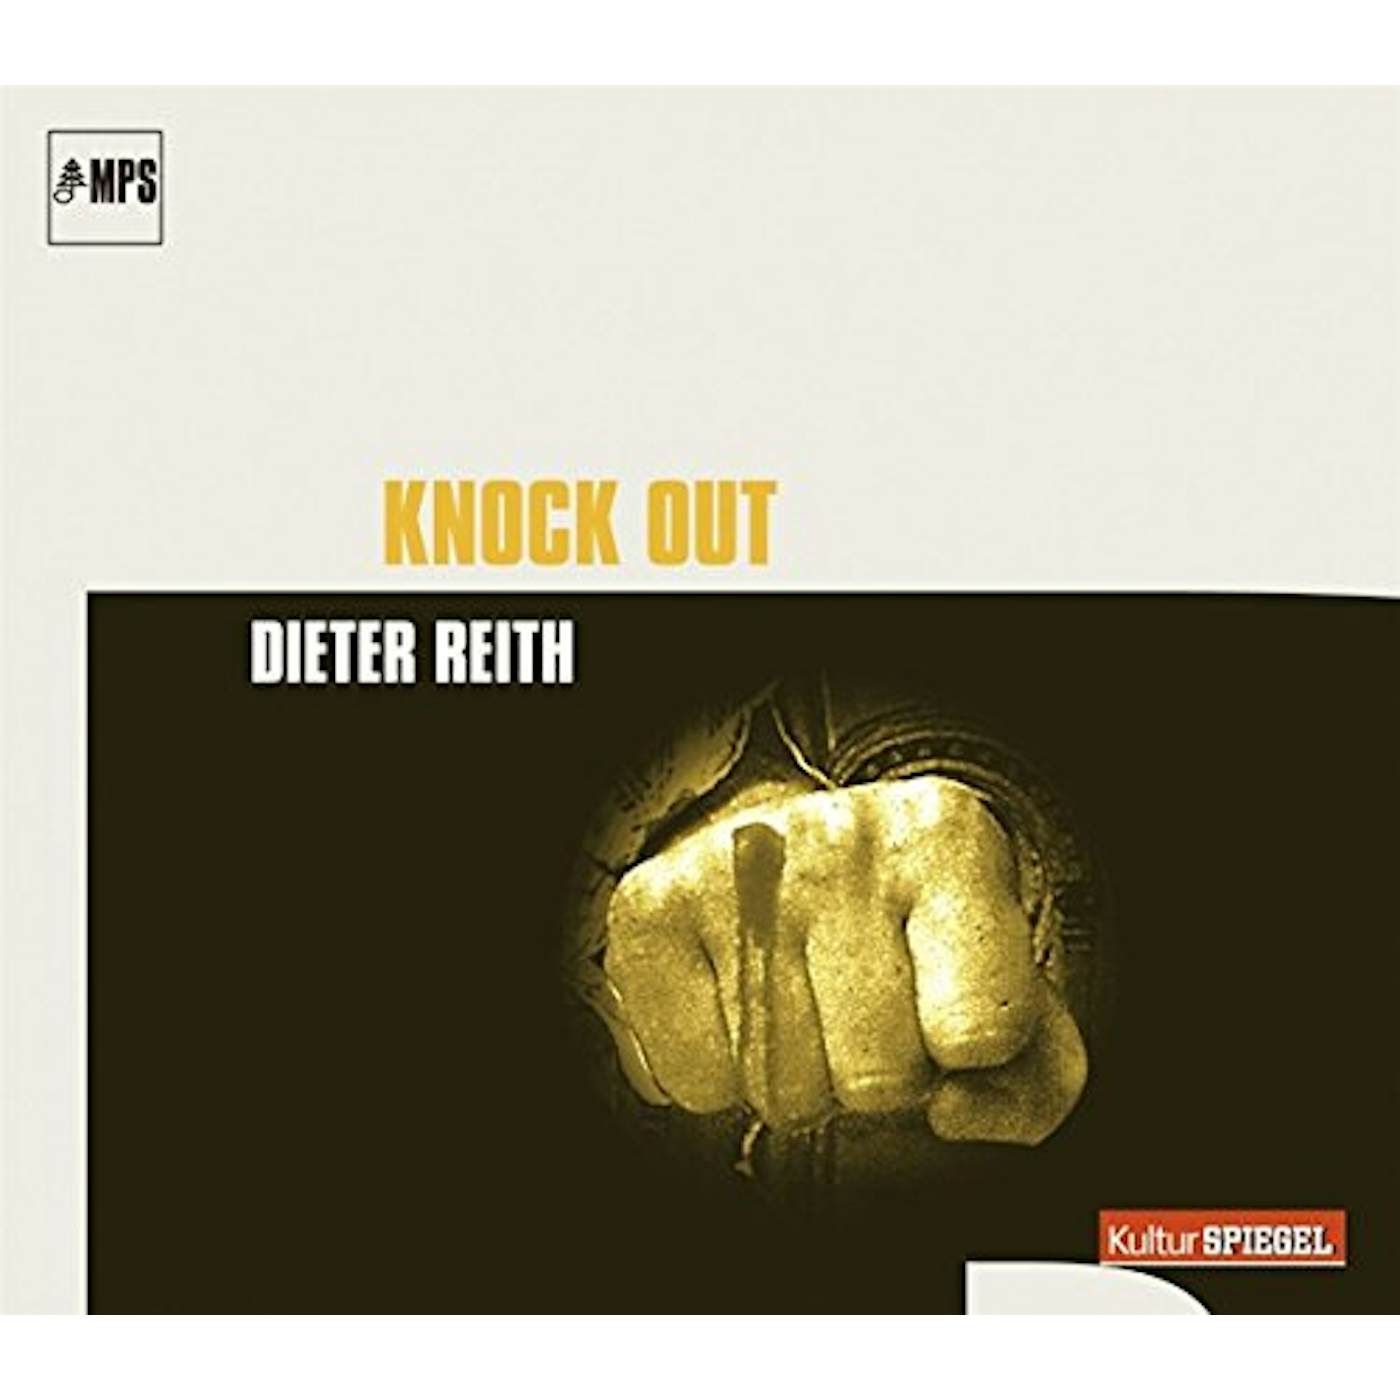 Dieter Reith KNOCK OUT CD